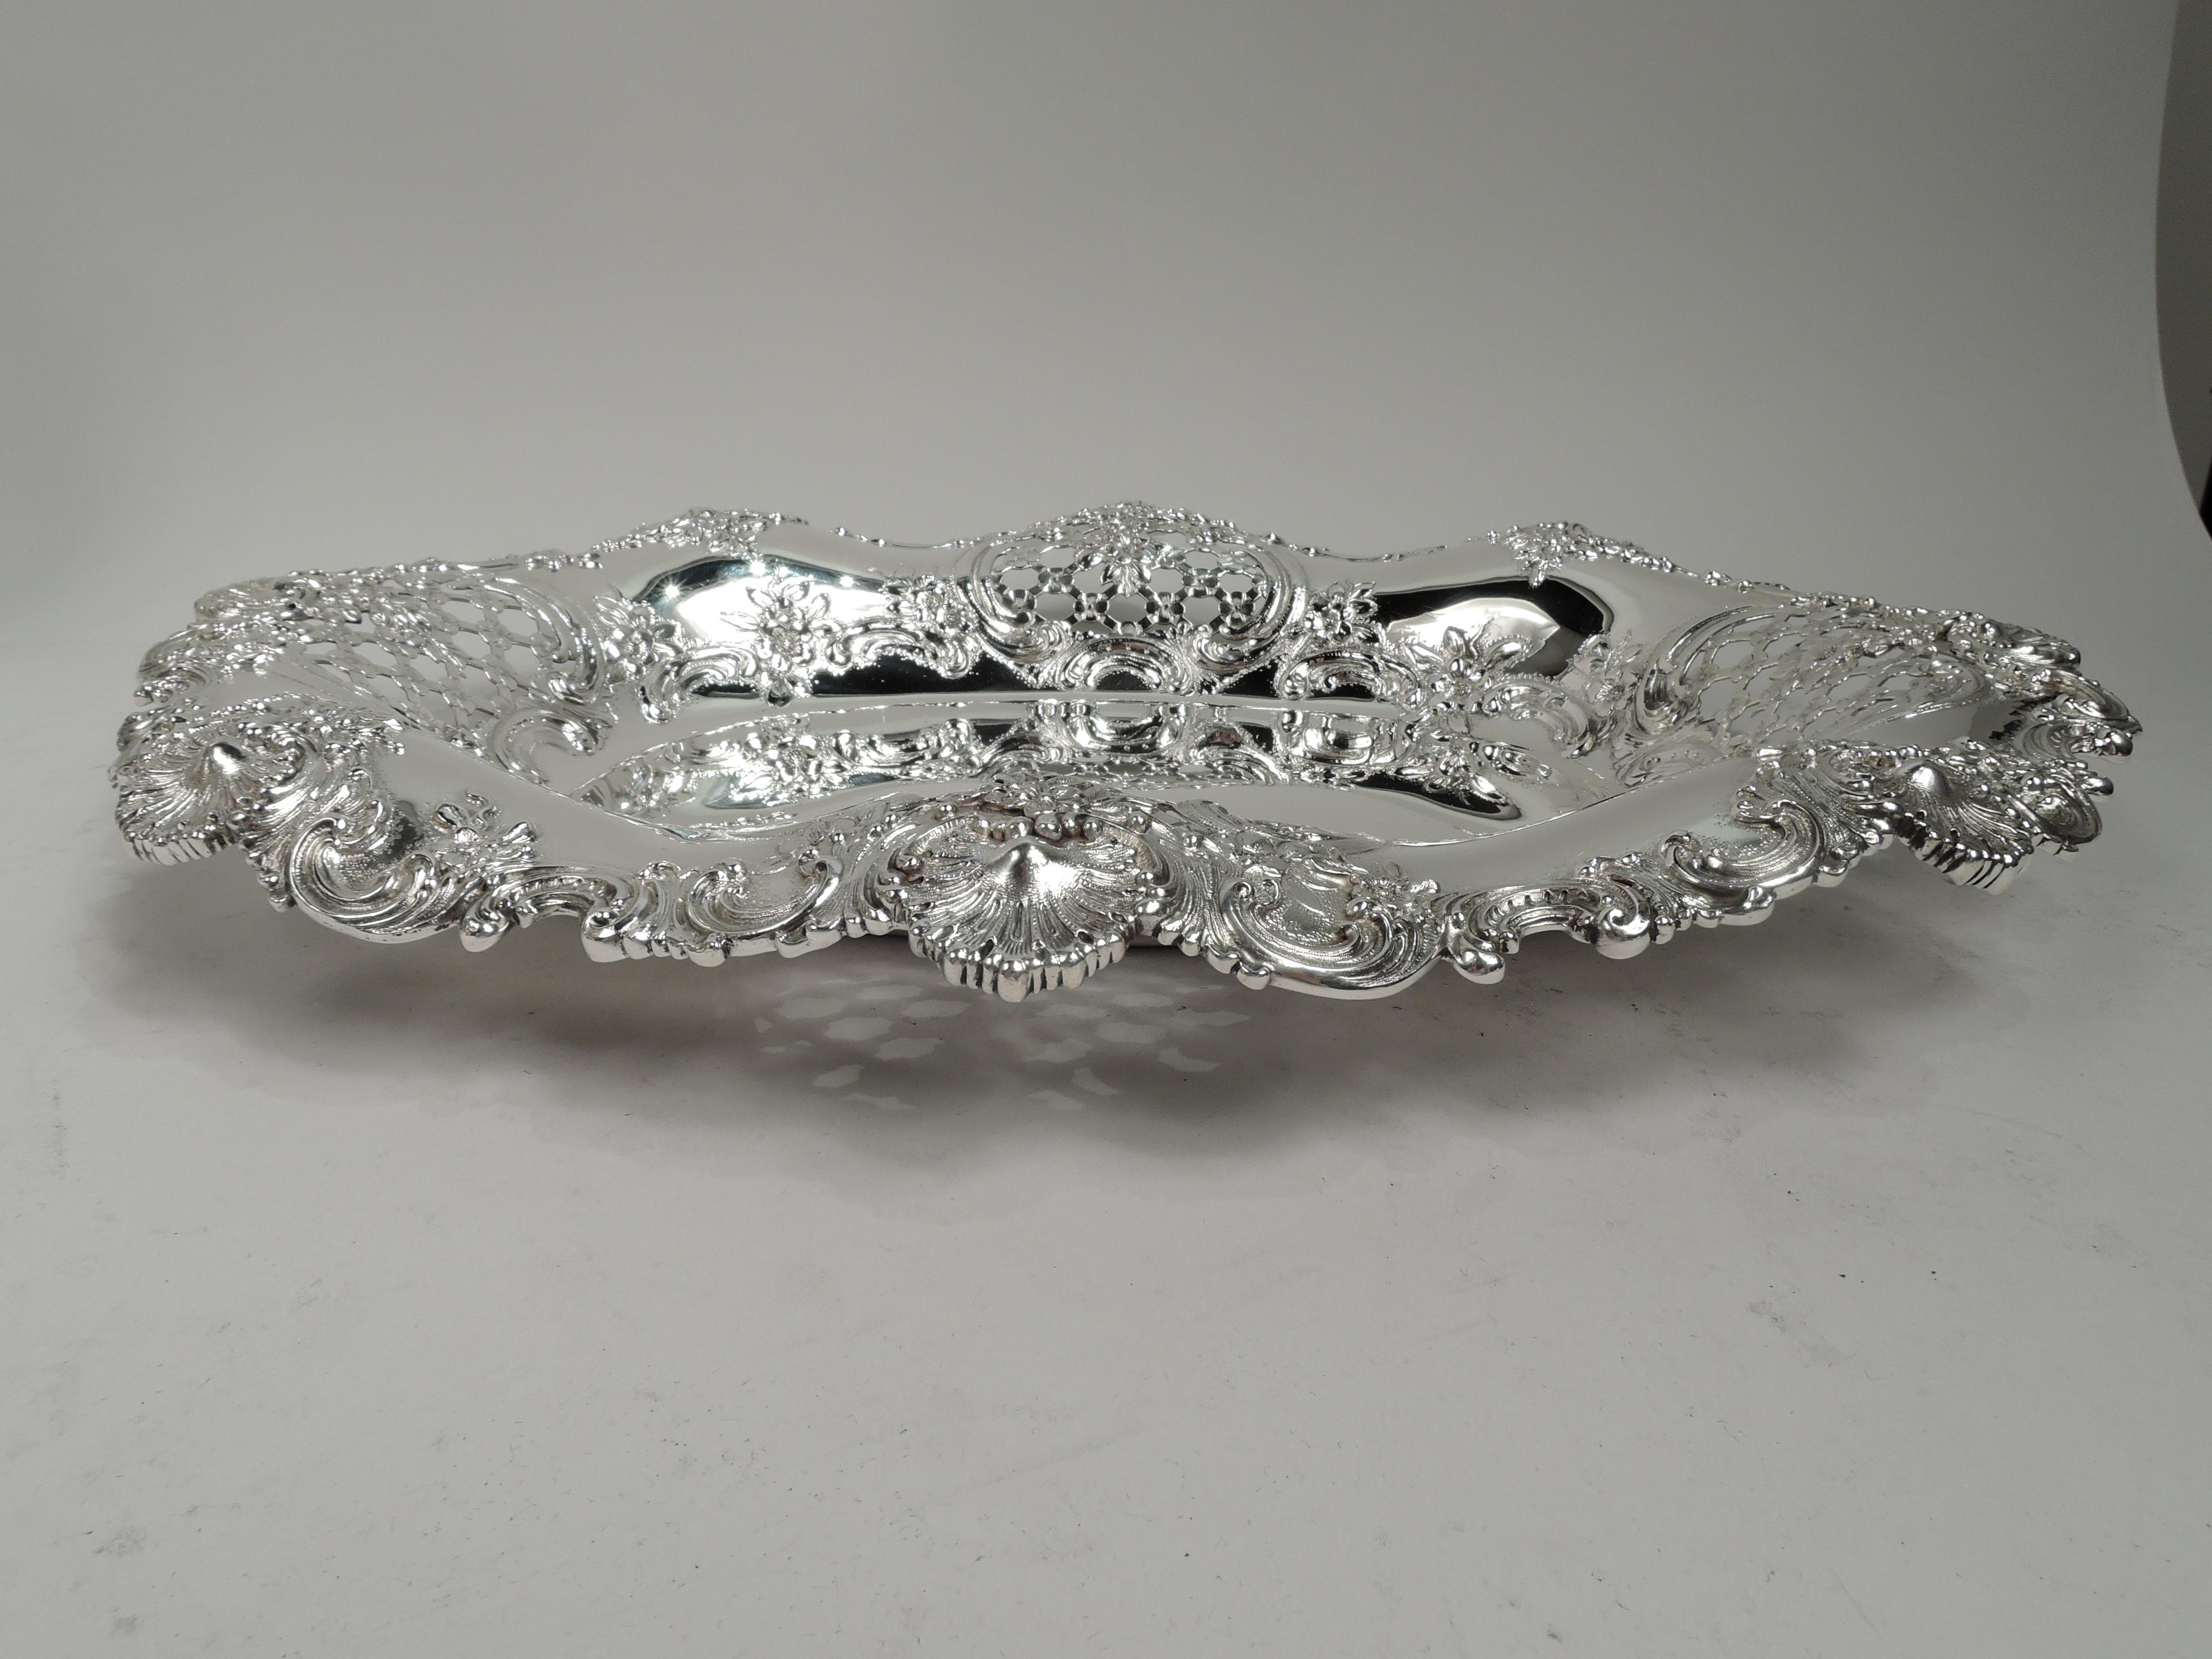 Victorian Classical sterling silver bowl. Made by Tiffany & Co. in New York. Solid oval well and wavy rim. Chased flowers and scrolls, and pierced and open floral lattice. Rim has applied scrolls, flowers, and scallop shells. Fully marked including